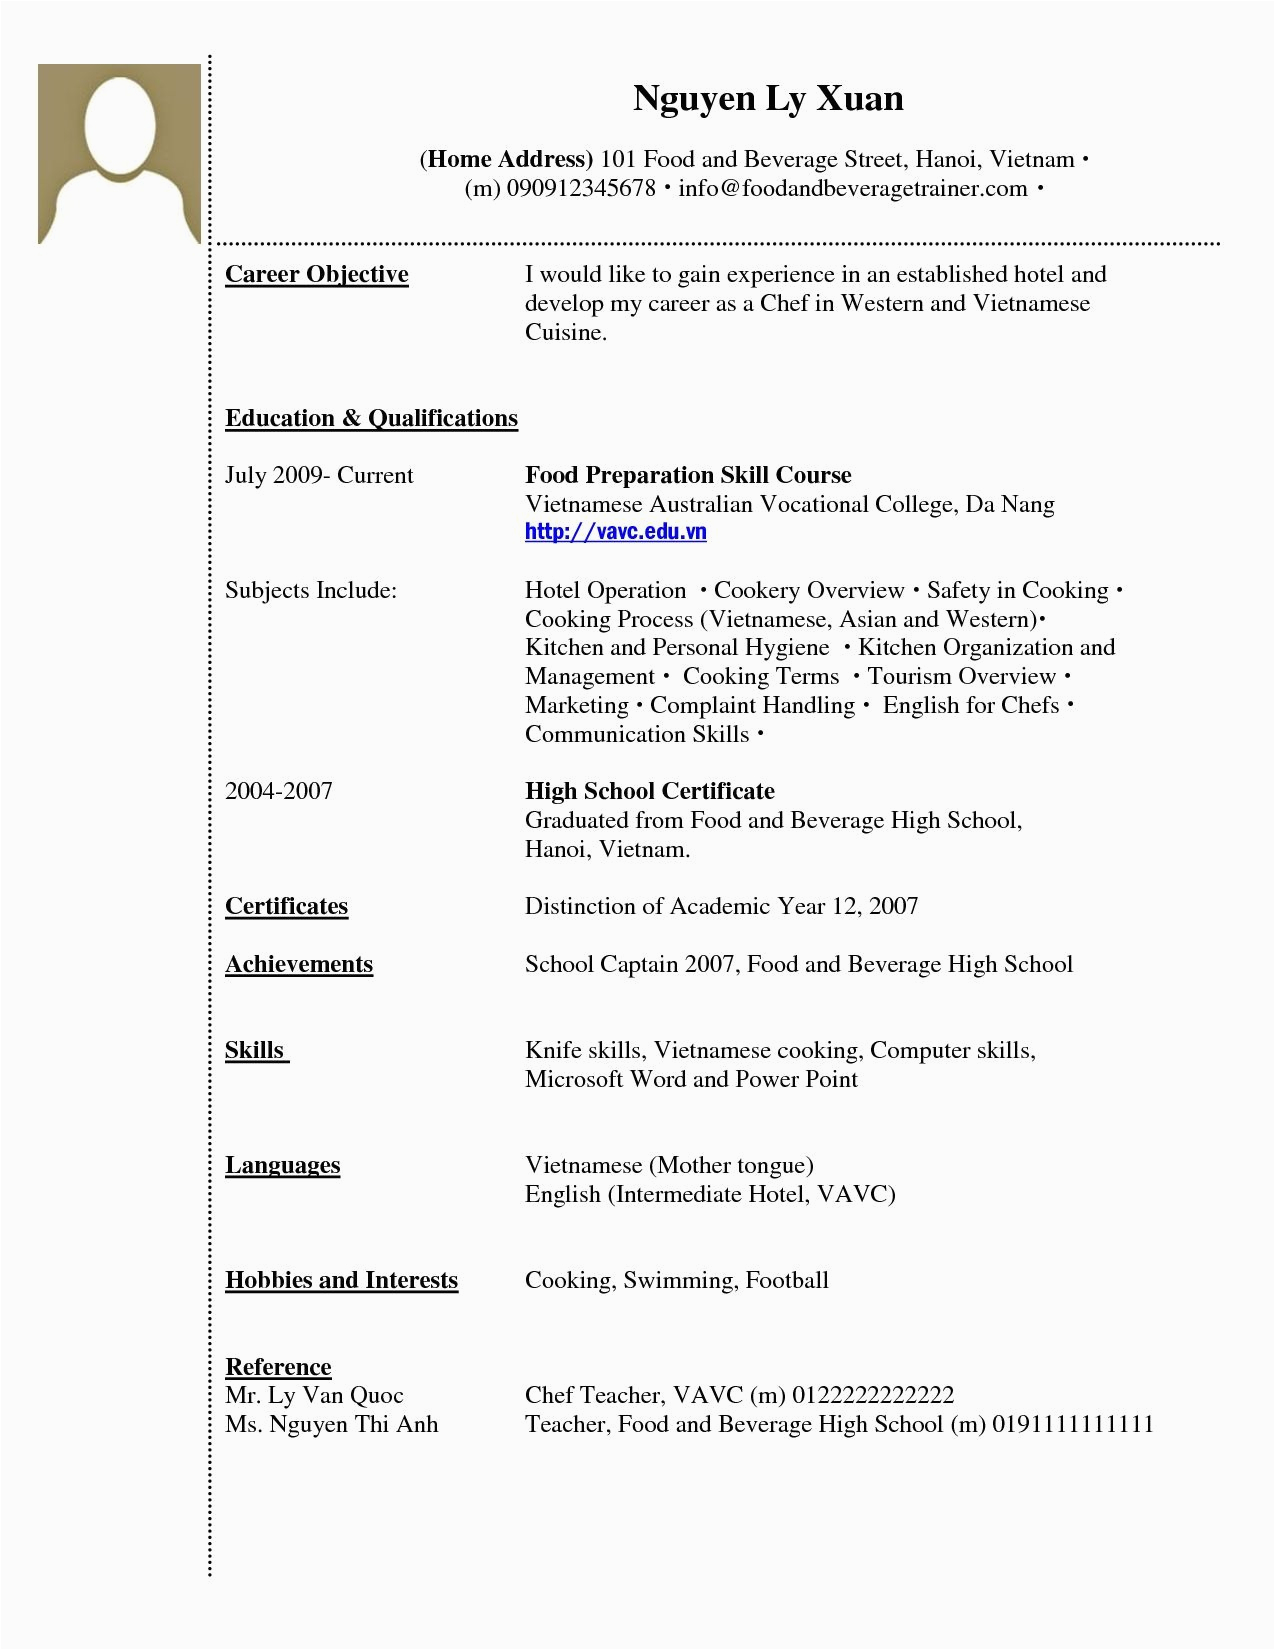 Sample Resume with Little Job Experience Resume Examples for Students with Little Work Experience